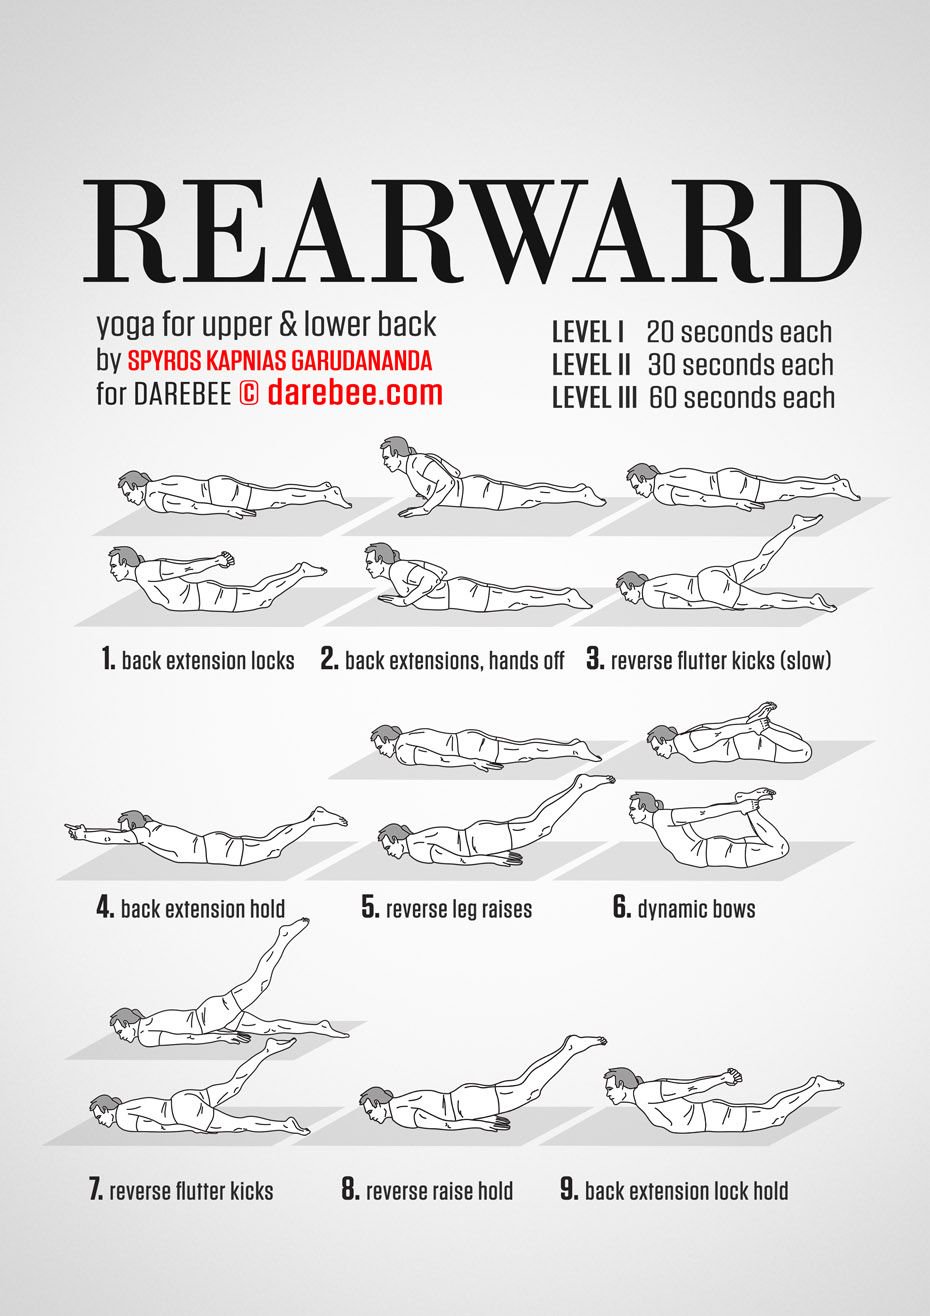 DAREBEE on X: Workout of the Day: Rearward